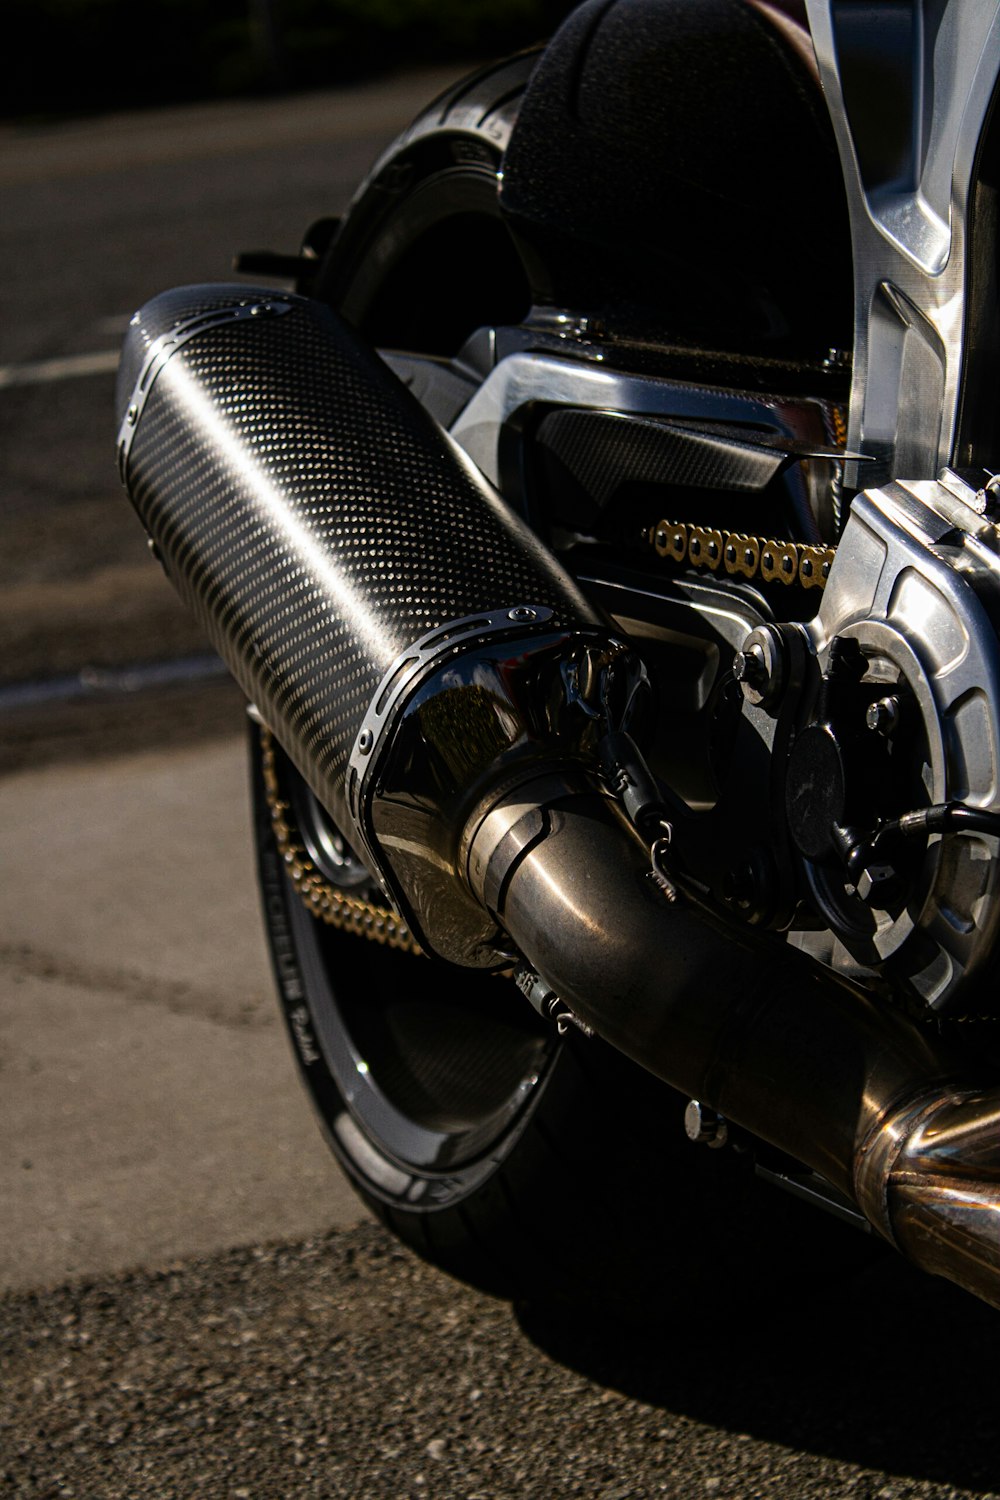 a close up of a motorcycle exhaust system